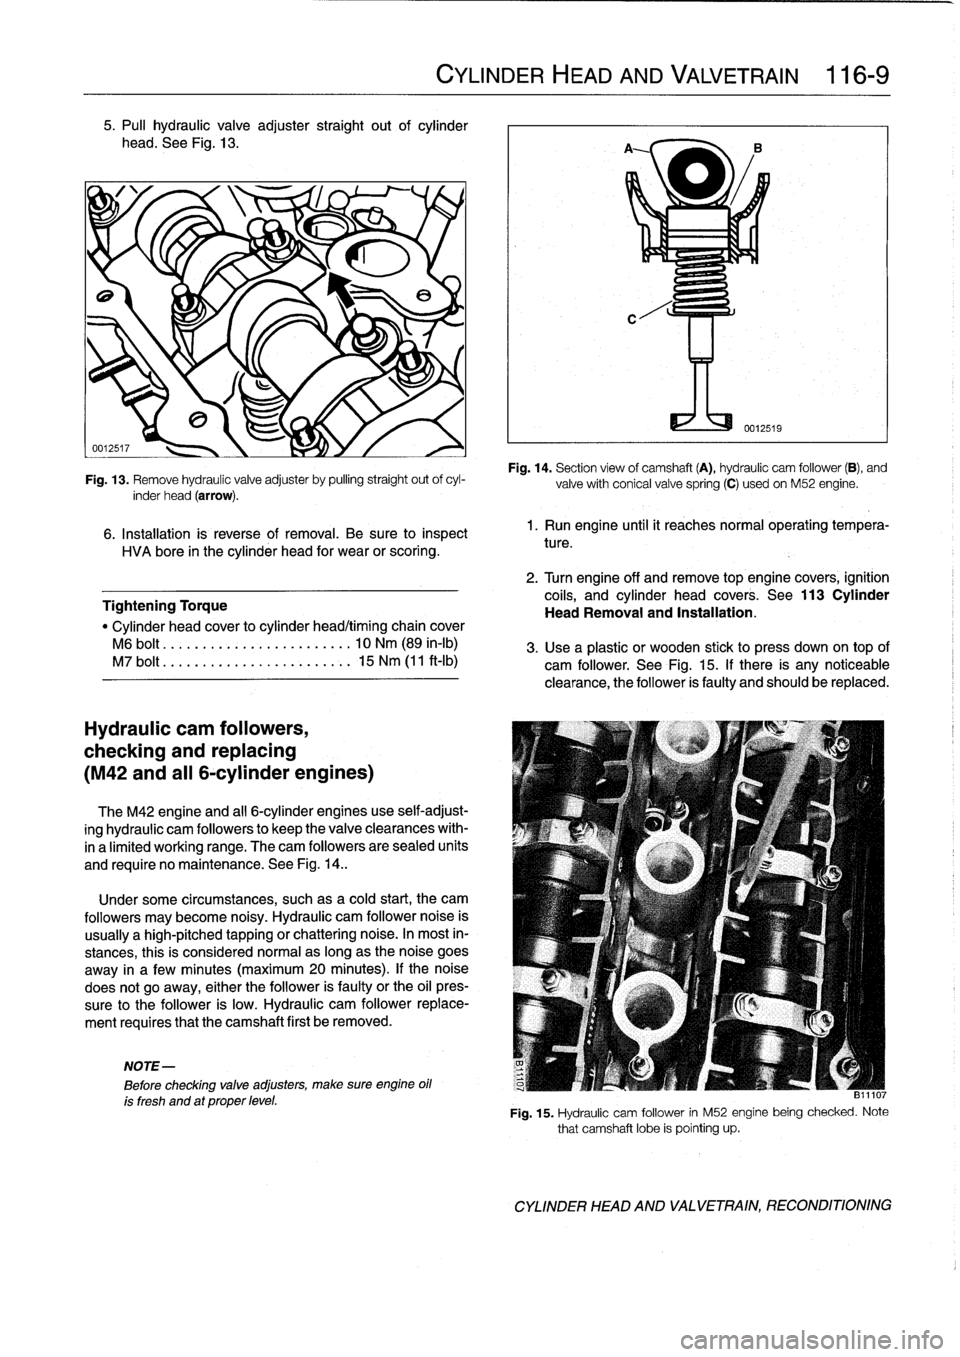 BMW 318i 1997 E36 Manual Online 5
.
Pull
hydraulic
valve
adjuster
straight
out
of
cylinder

head
.
See
Fig
.
13
.

Fig
.
13
.
Remove
hydraulic
valve
adjuster
by
pulling
straight
out
ofcyl-
inder
head
(arrow)
.

6
.
Installation
is
r